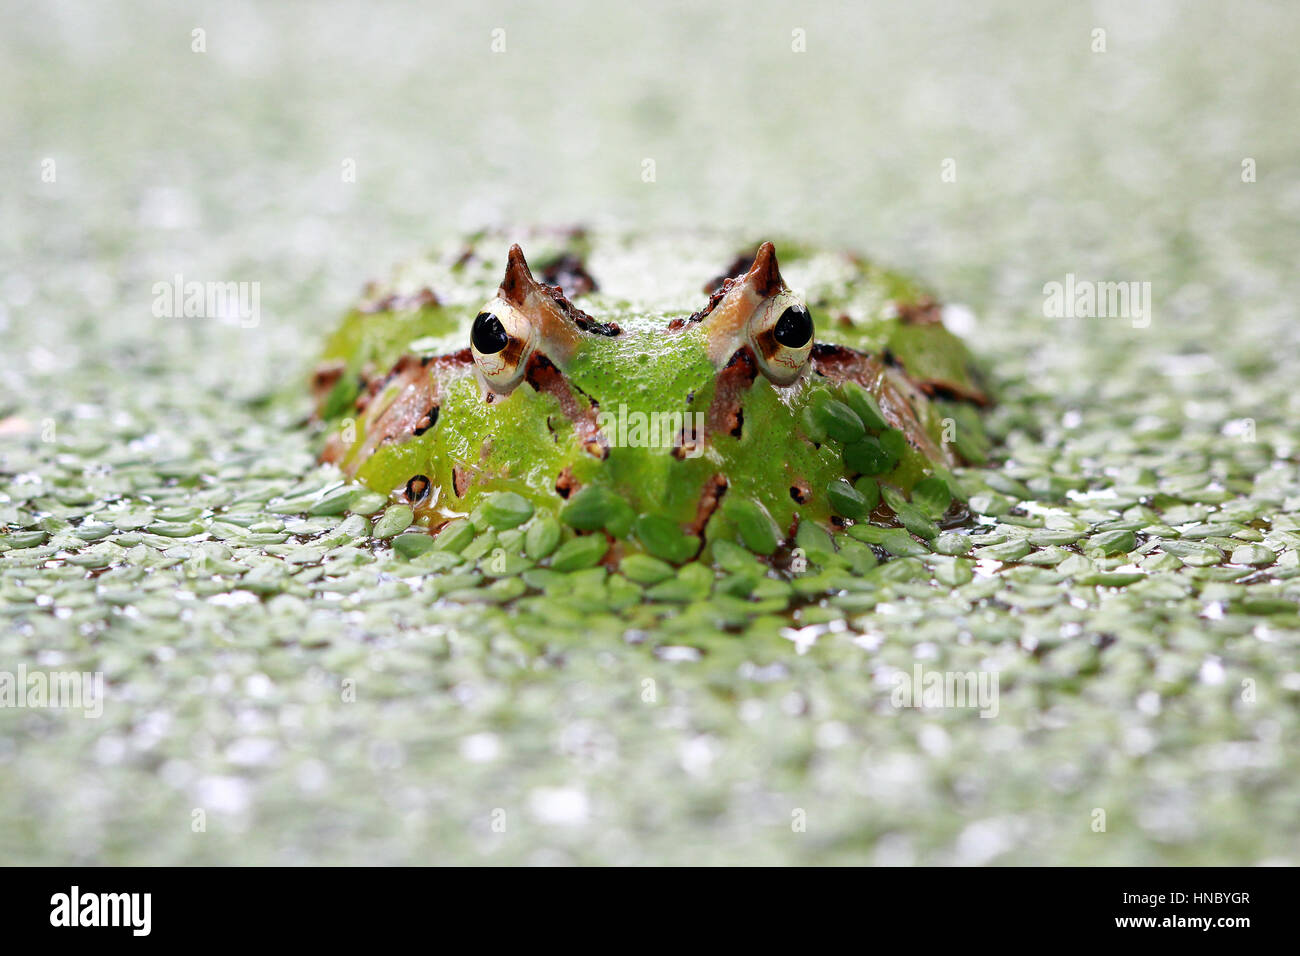 Pacman frog sommerso in lenticchie d'acqua, Indonesia Foto Stock